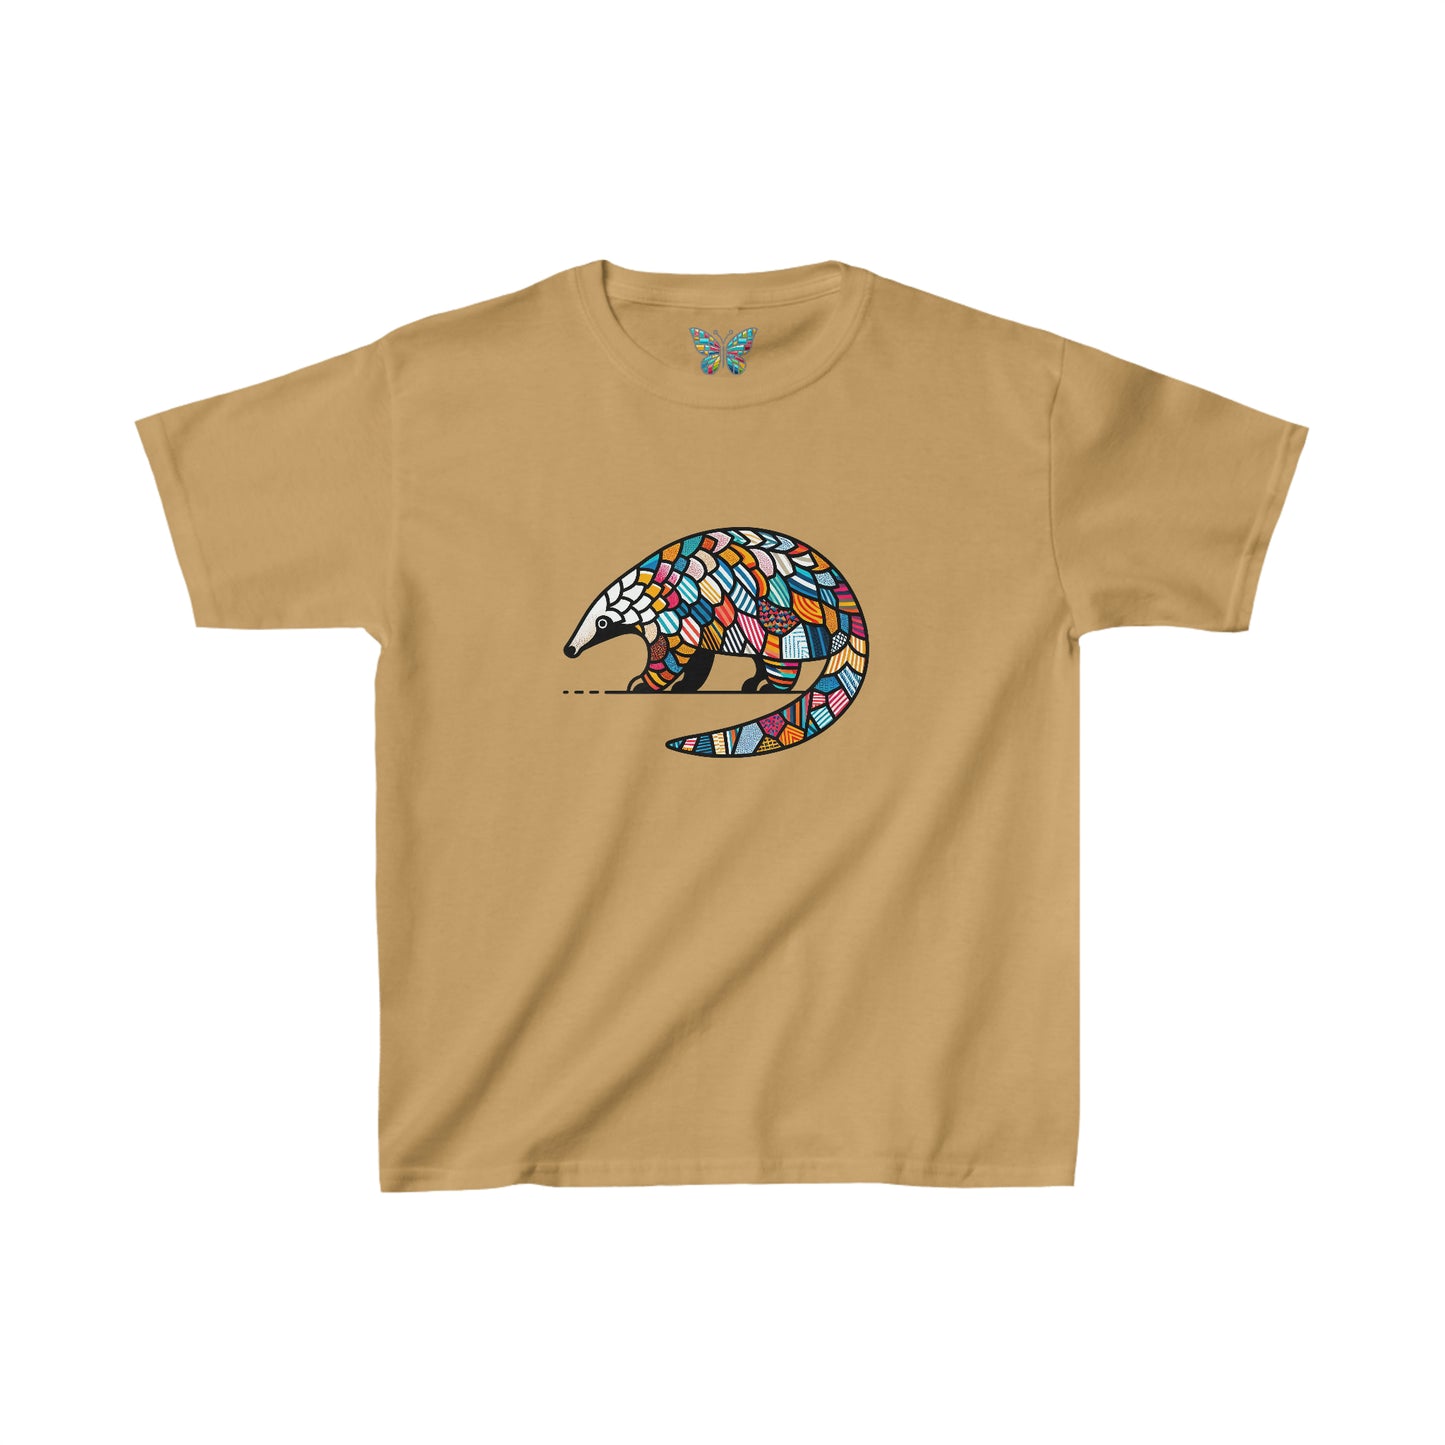 Pangolin Fantascale - Youth - Snazzle Tee